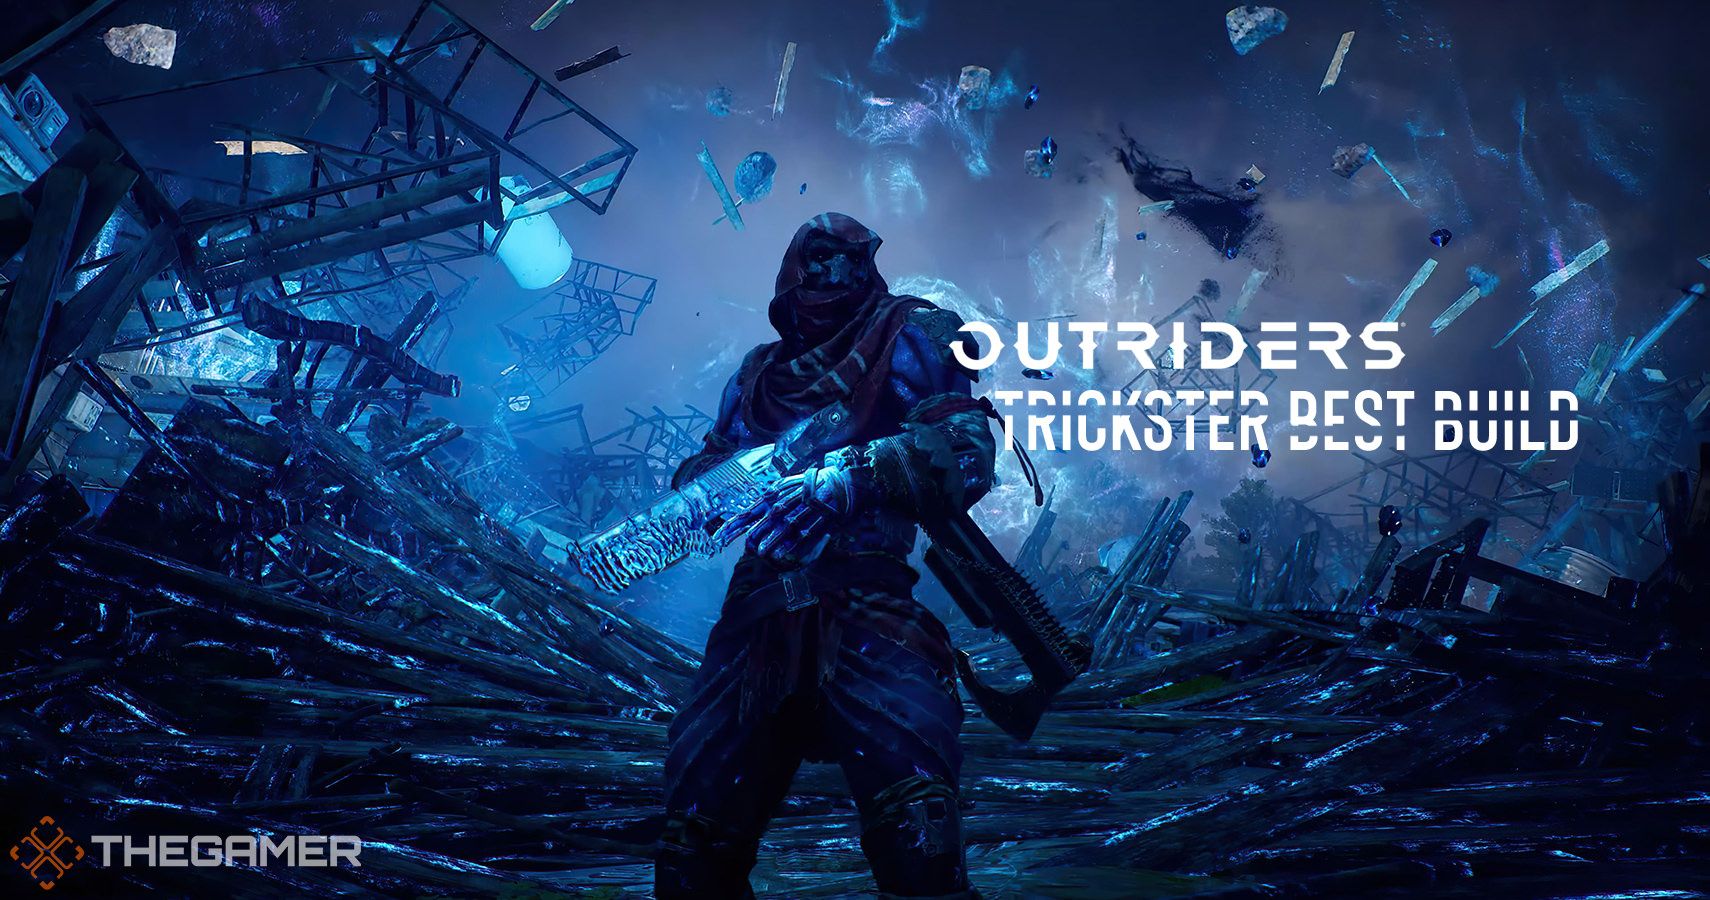 Outriders - Trickster